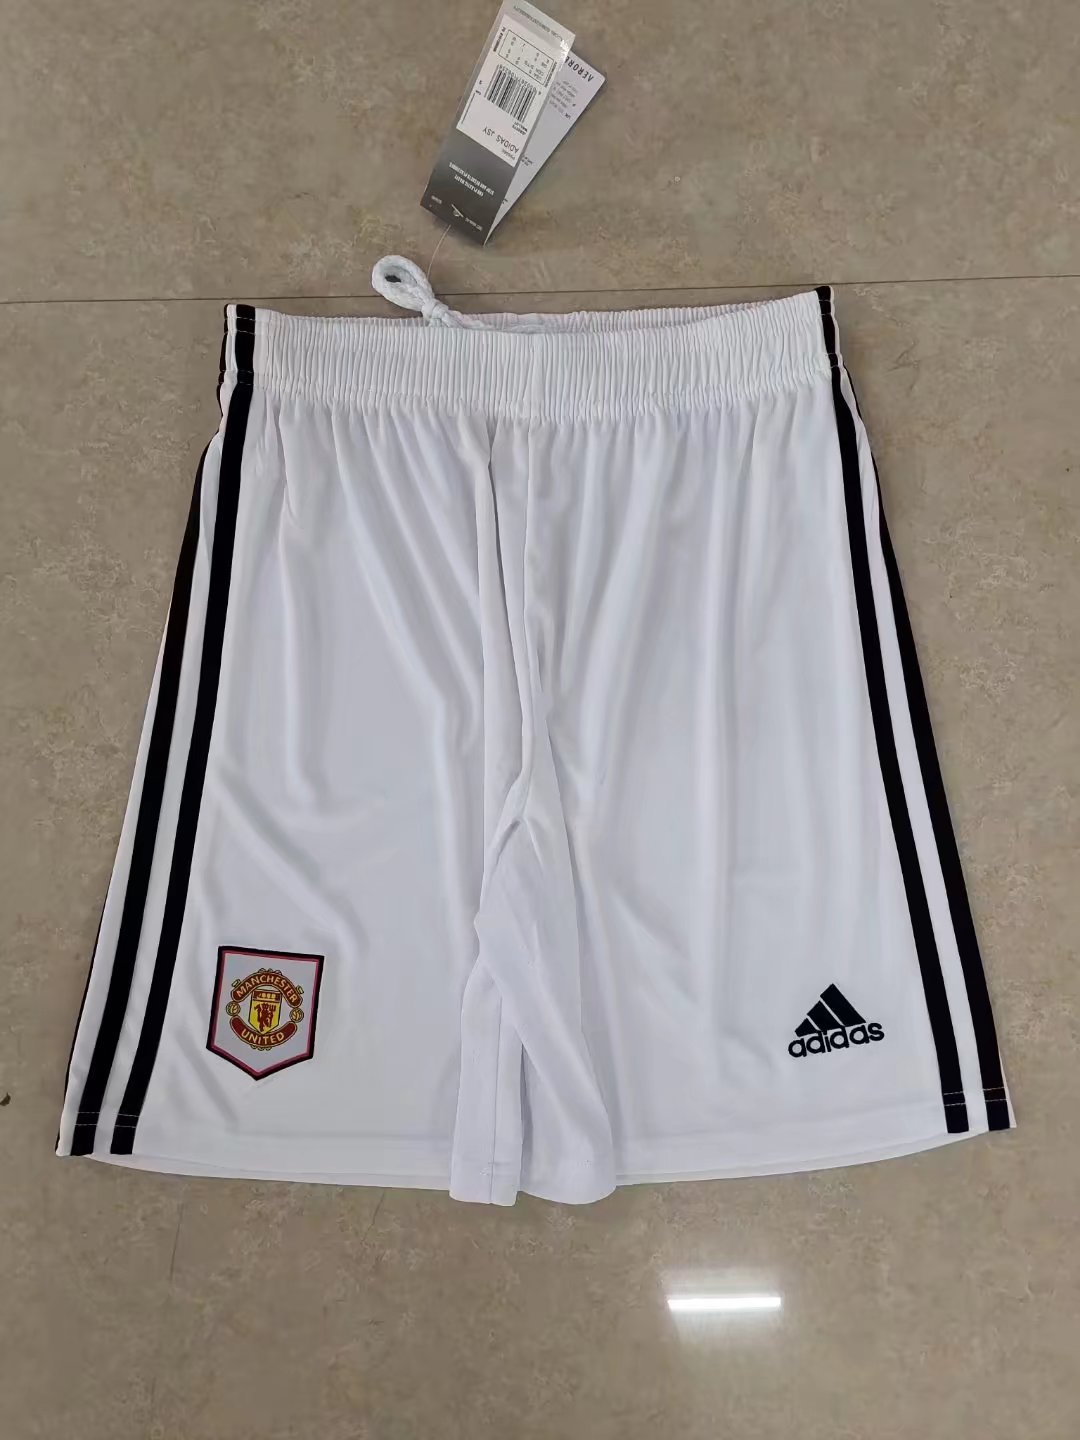 2022/2023 Manchester United home shorts